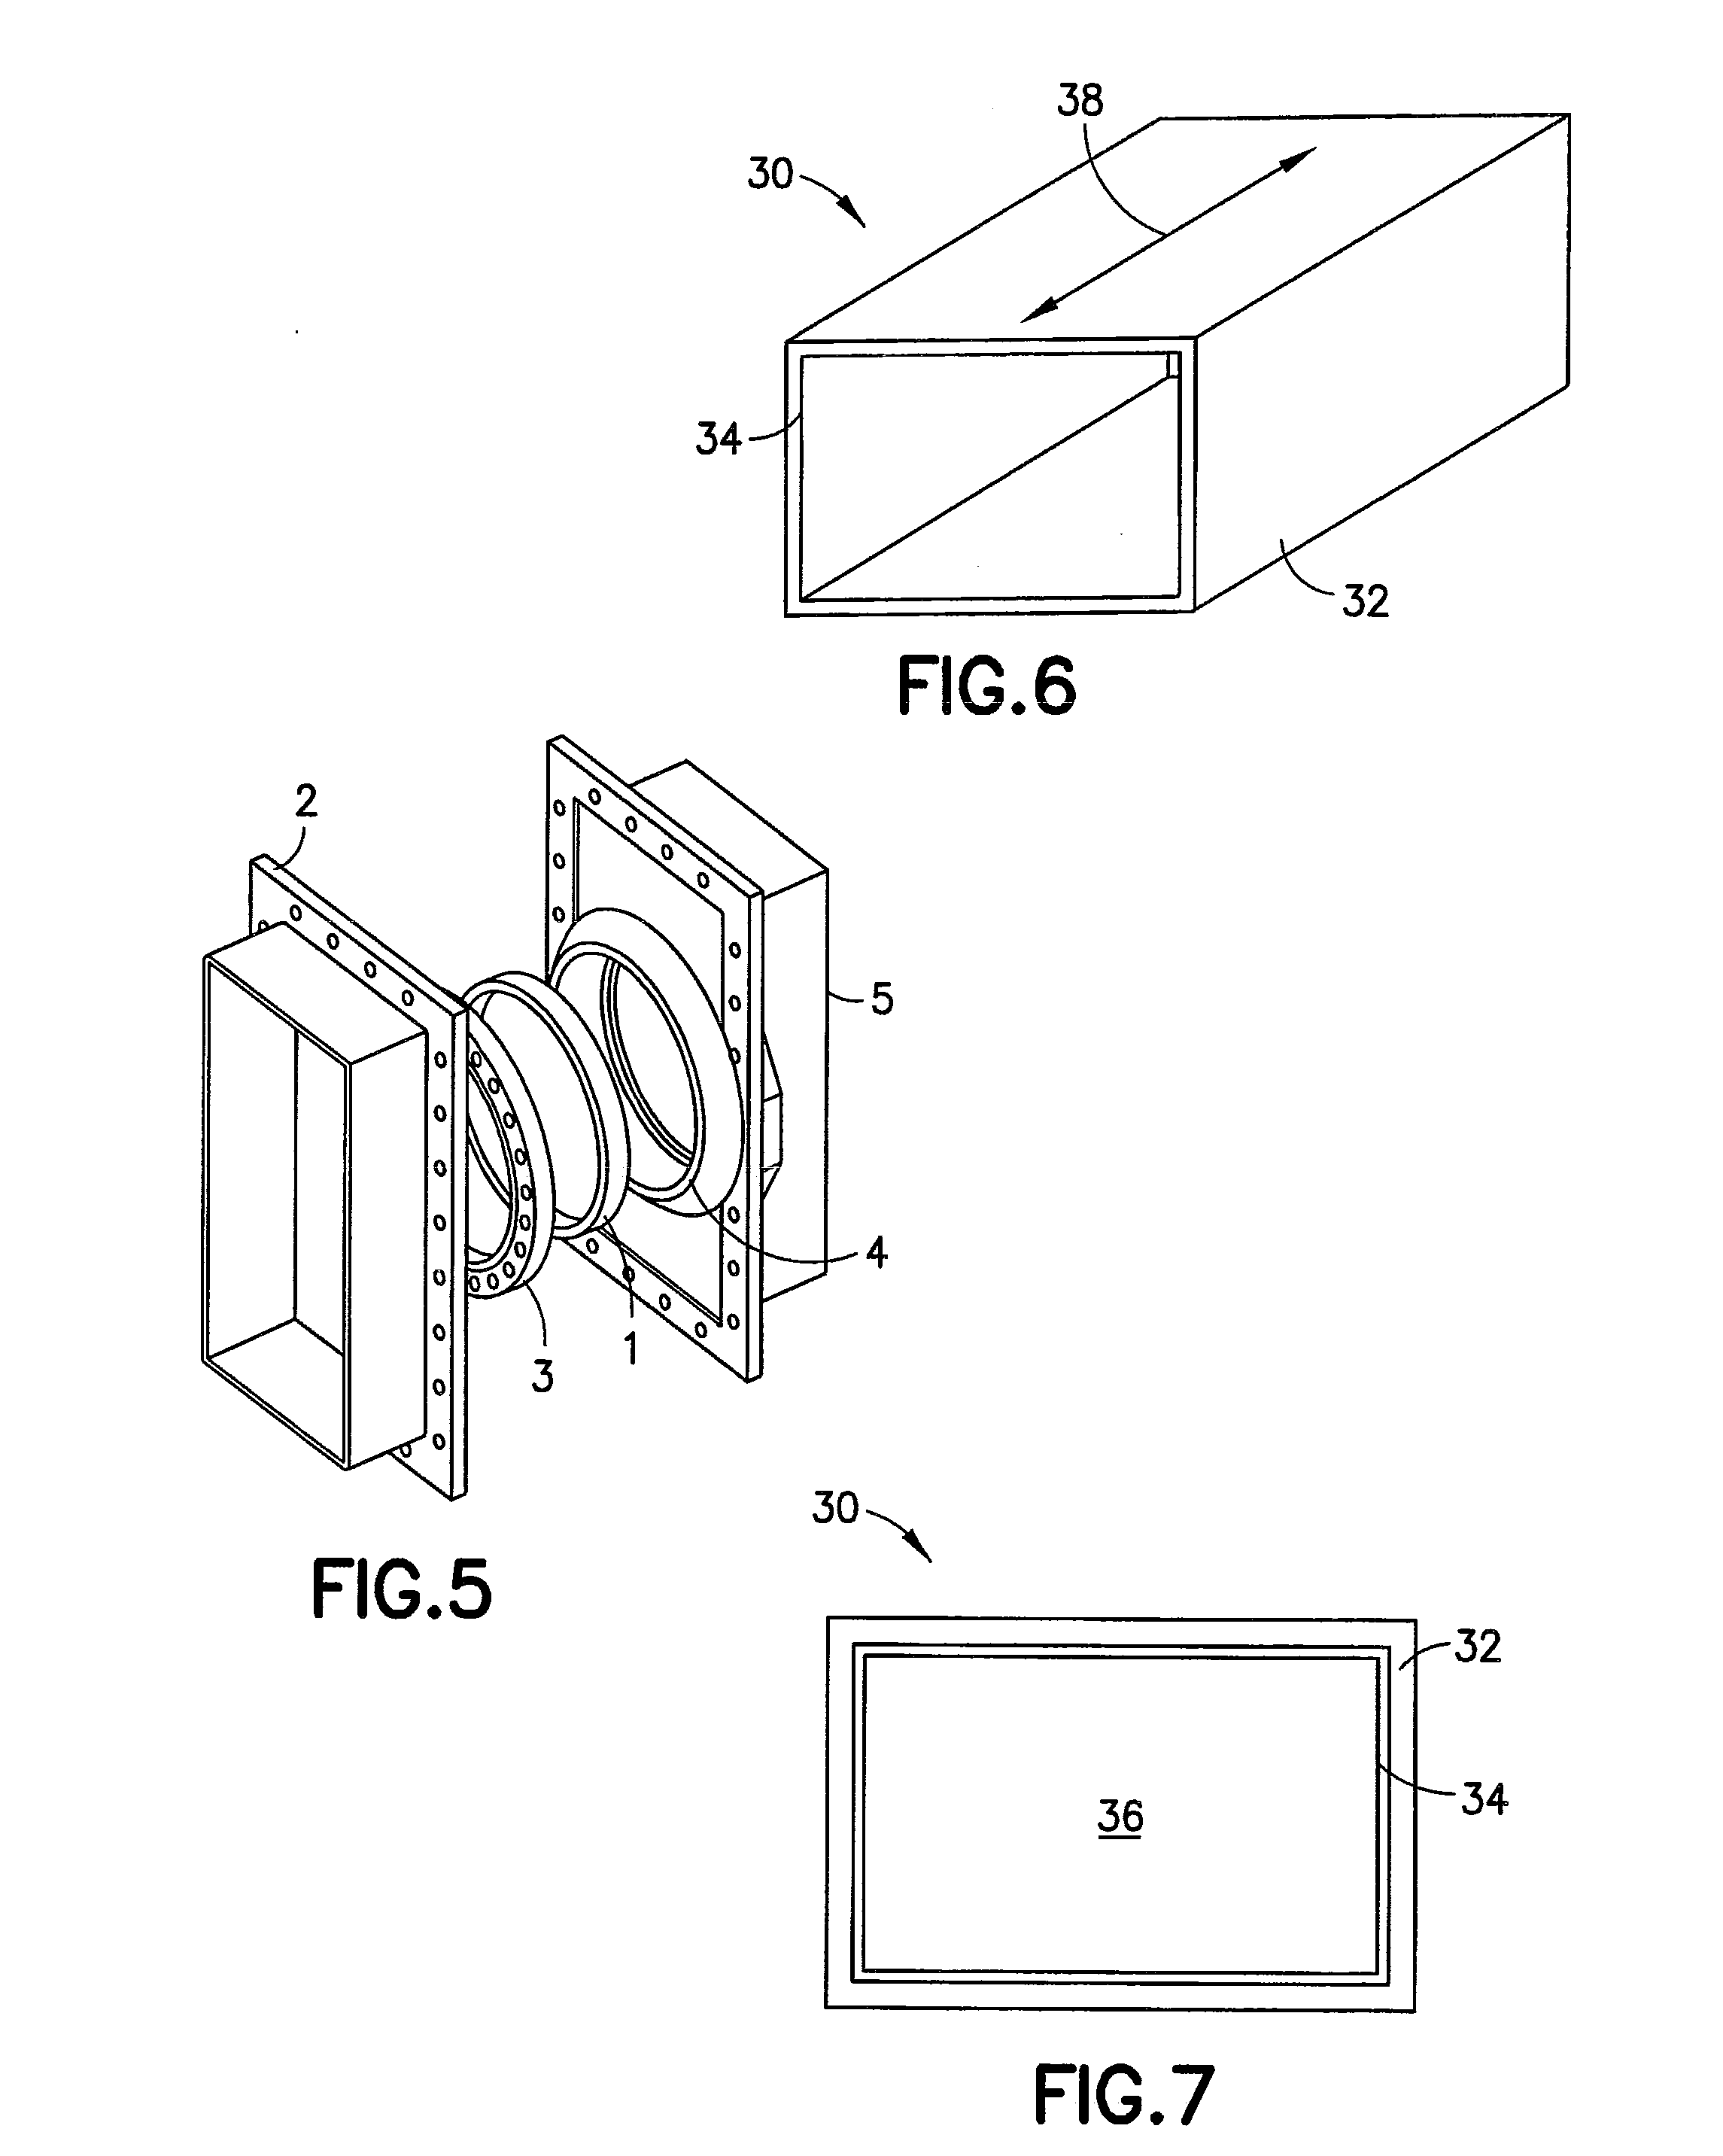 Component having a multipactor-inhibiting carbon nanofilm thereon, apparatus including the component, and methods of manufacturing and using the component